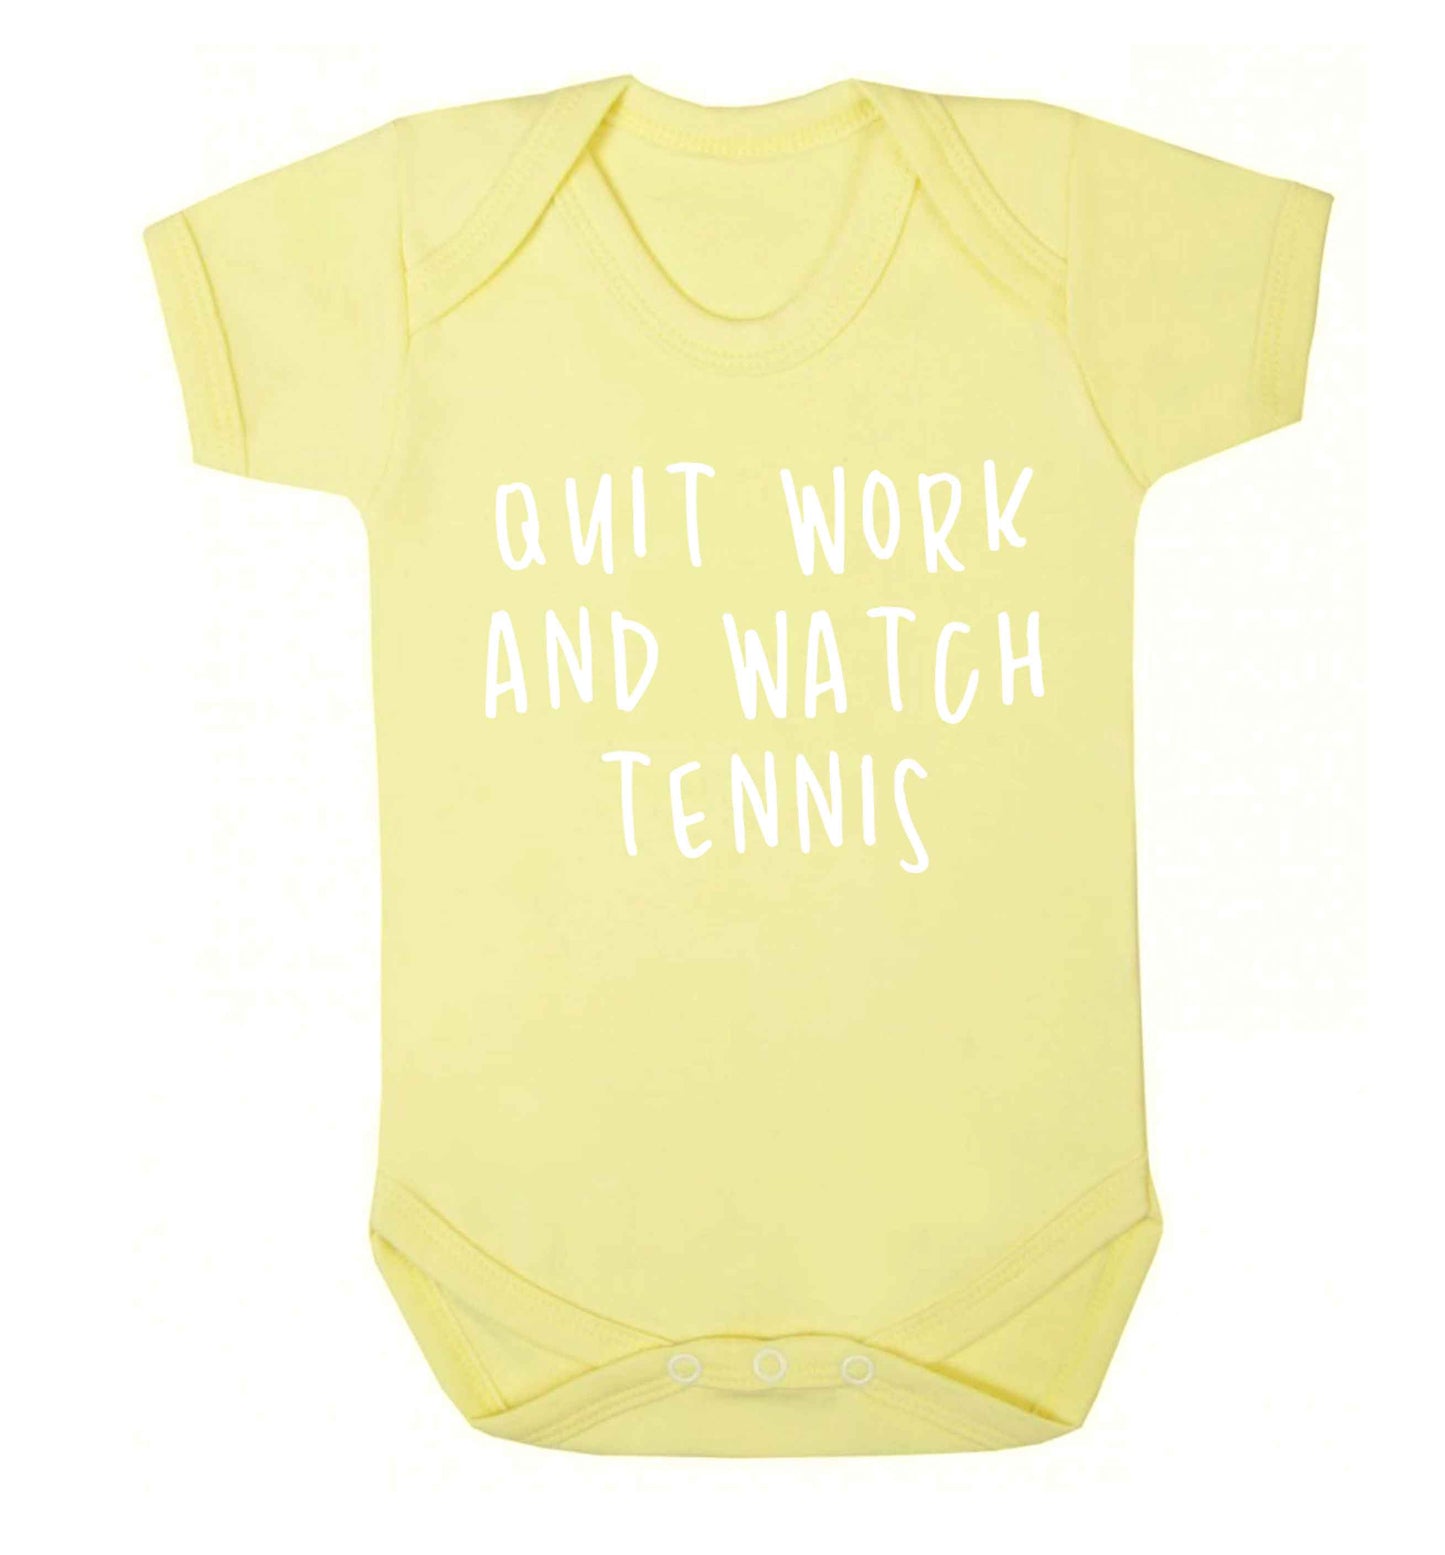 Quit work and watch tennis Baby Vest pale yellow 18-24 months